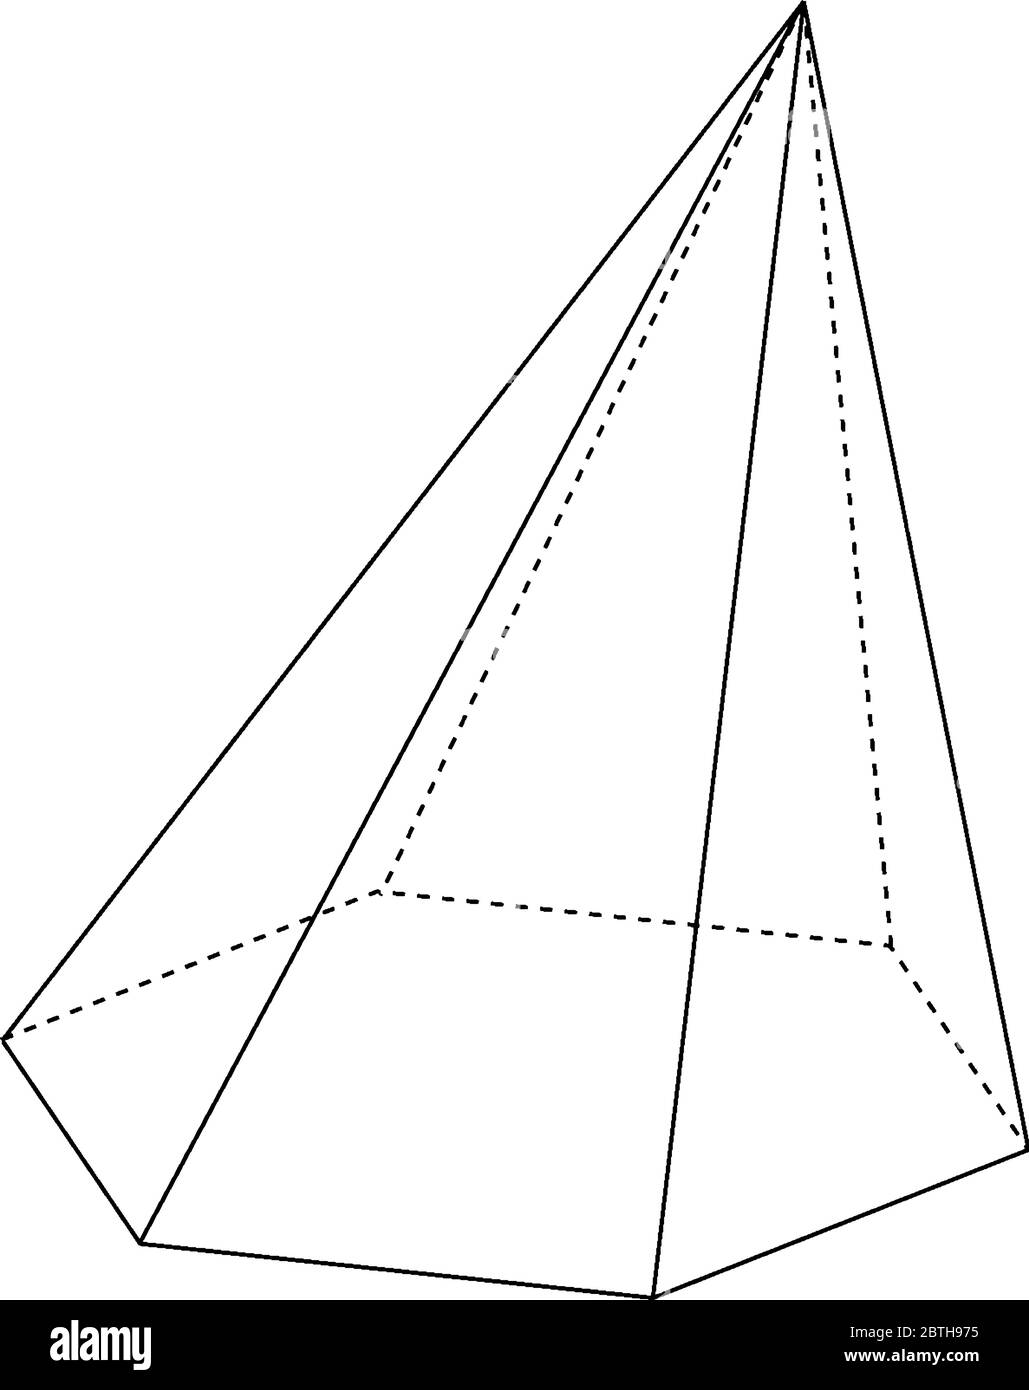 Geometric construction of a non-right, or skewed, hexagonal pyramid with hidden edges shown. The base is a hexagon and the faces are isosceles triangl Stock Vector